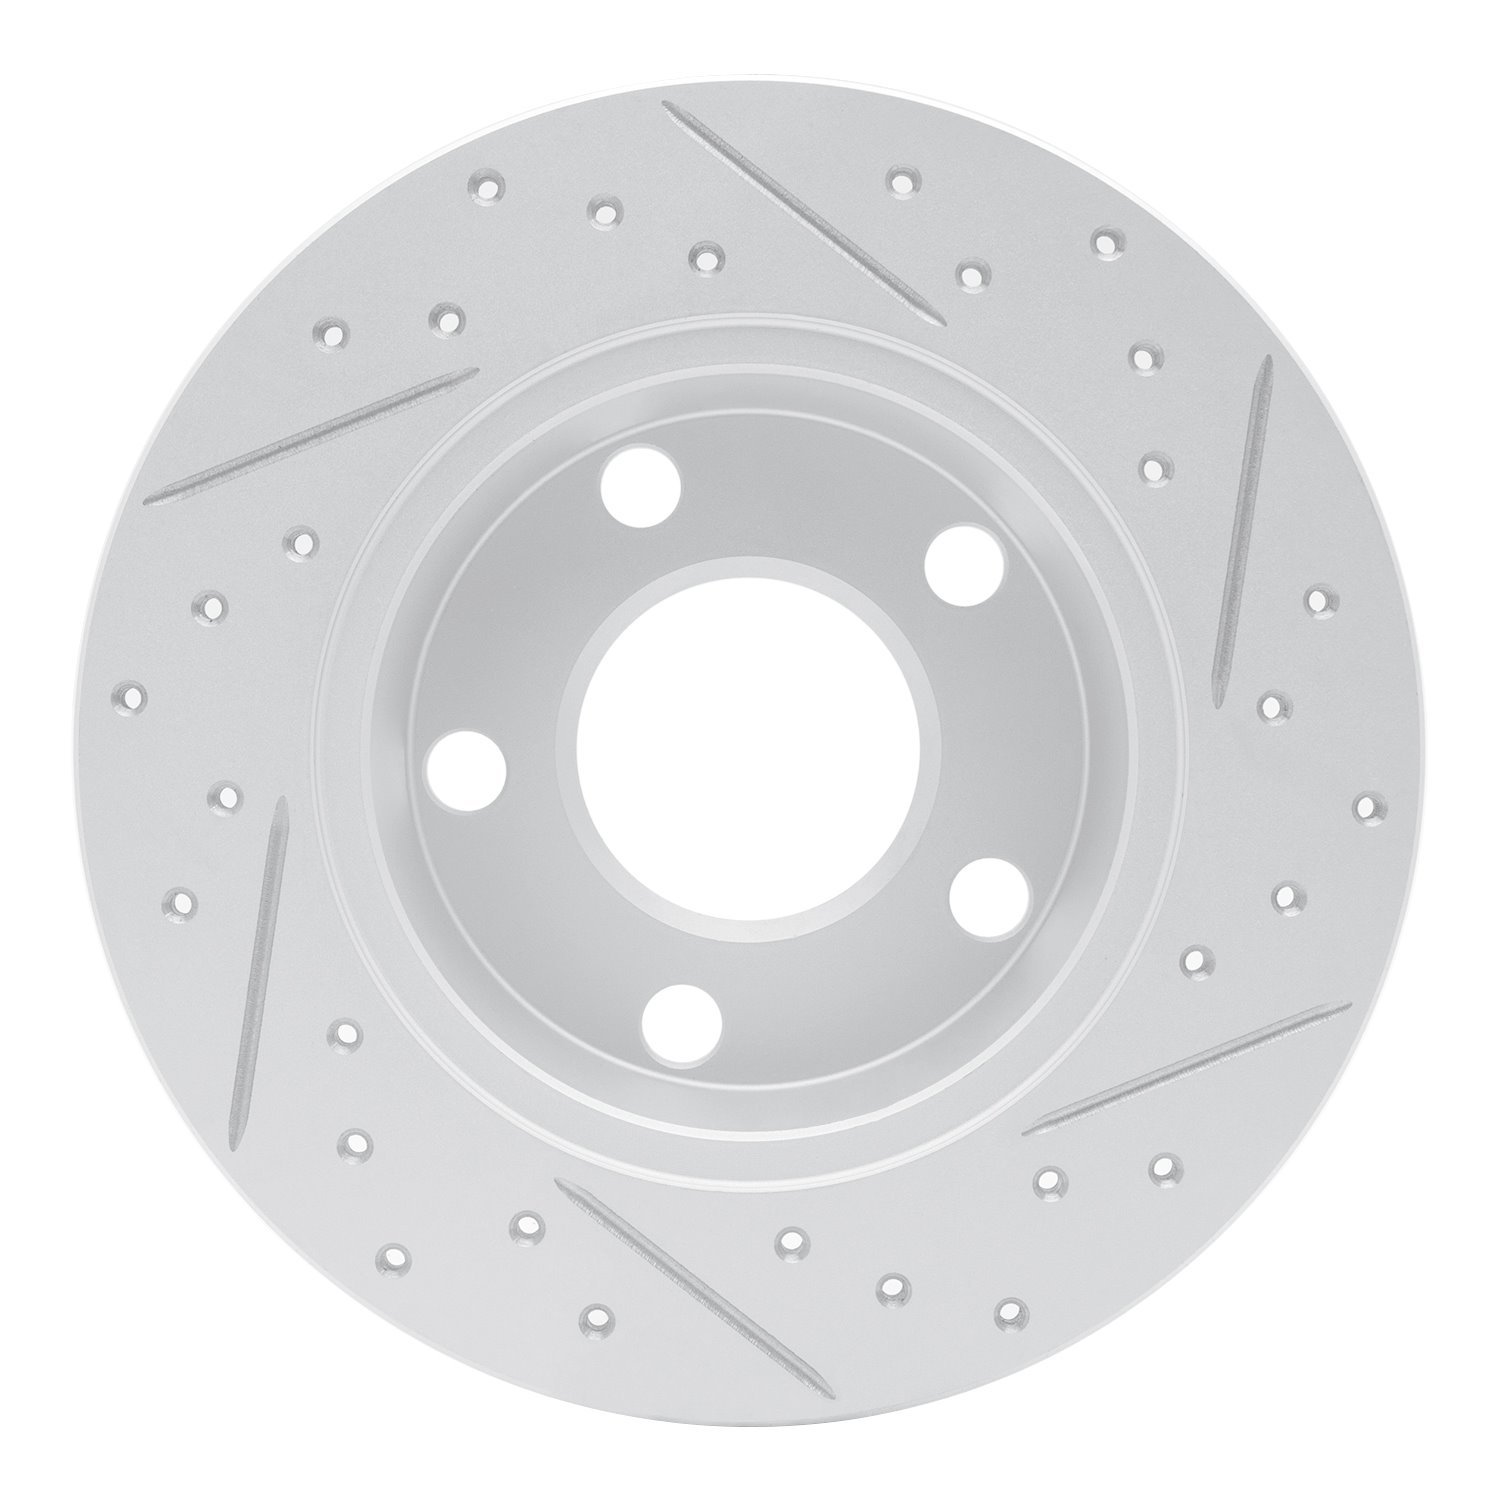 830-73022R Geoperformance Drilled/Slotted Brake Rotor, 1999-2005 Audi/Volkswagen, Position: Rear Right